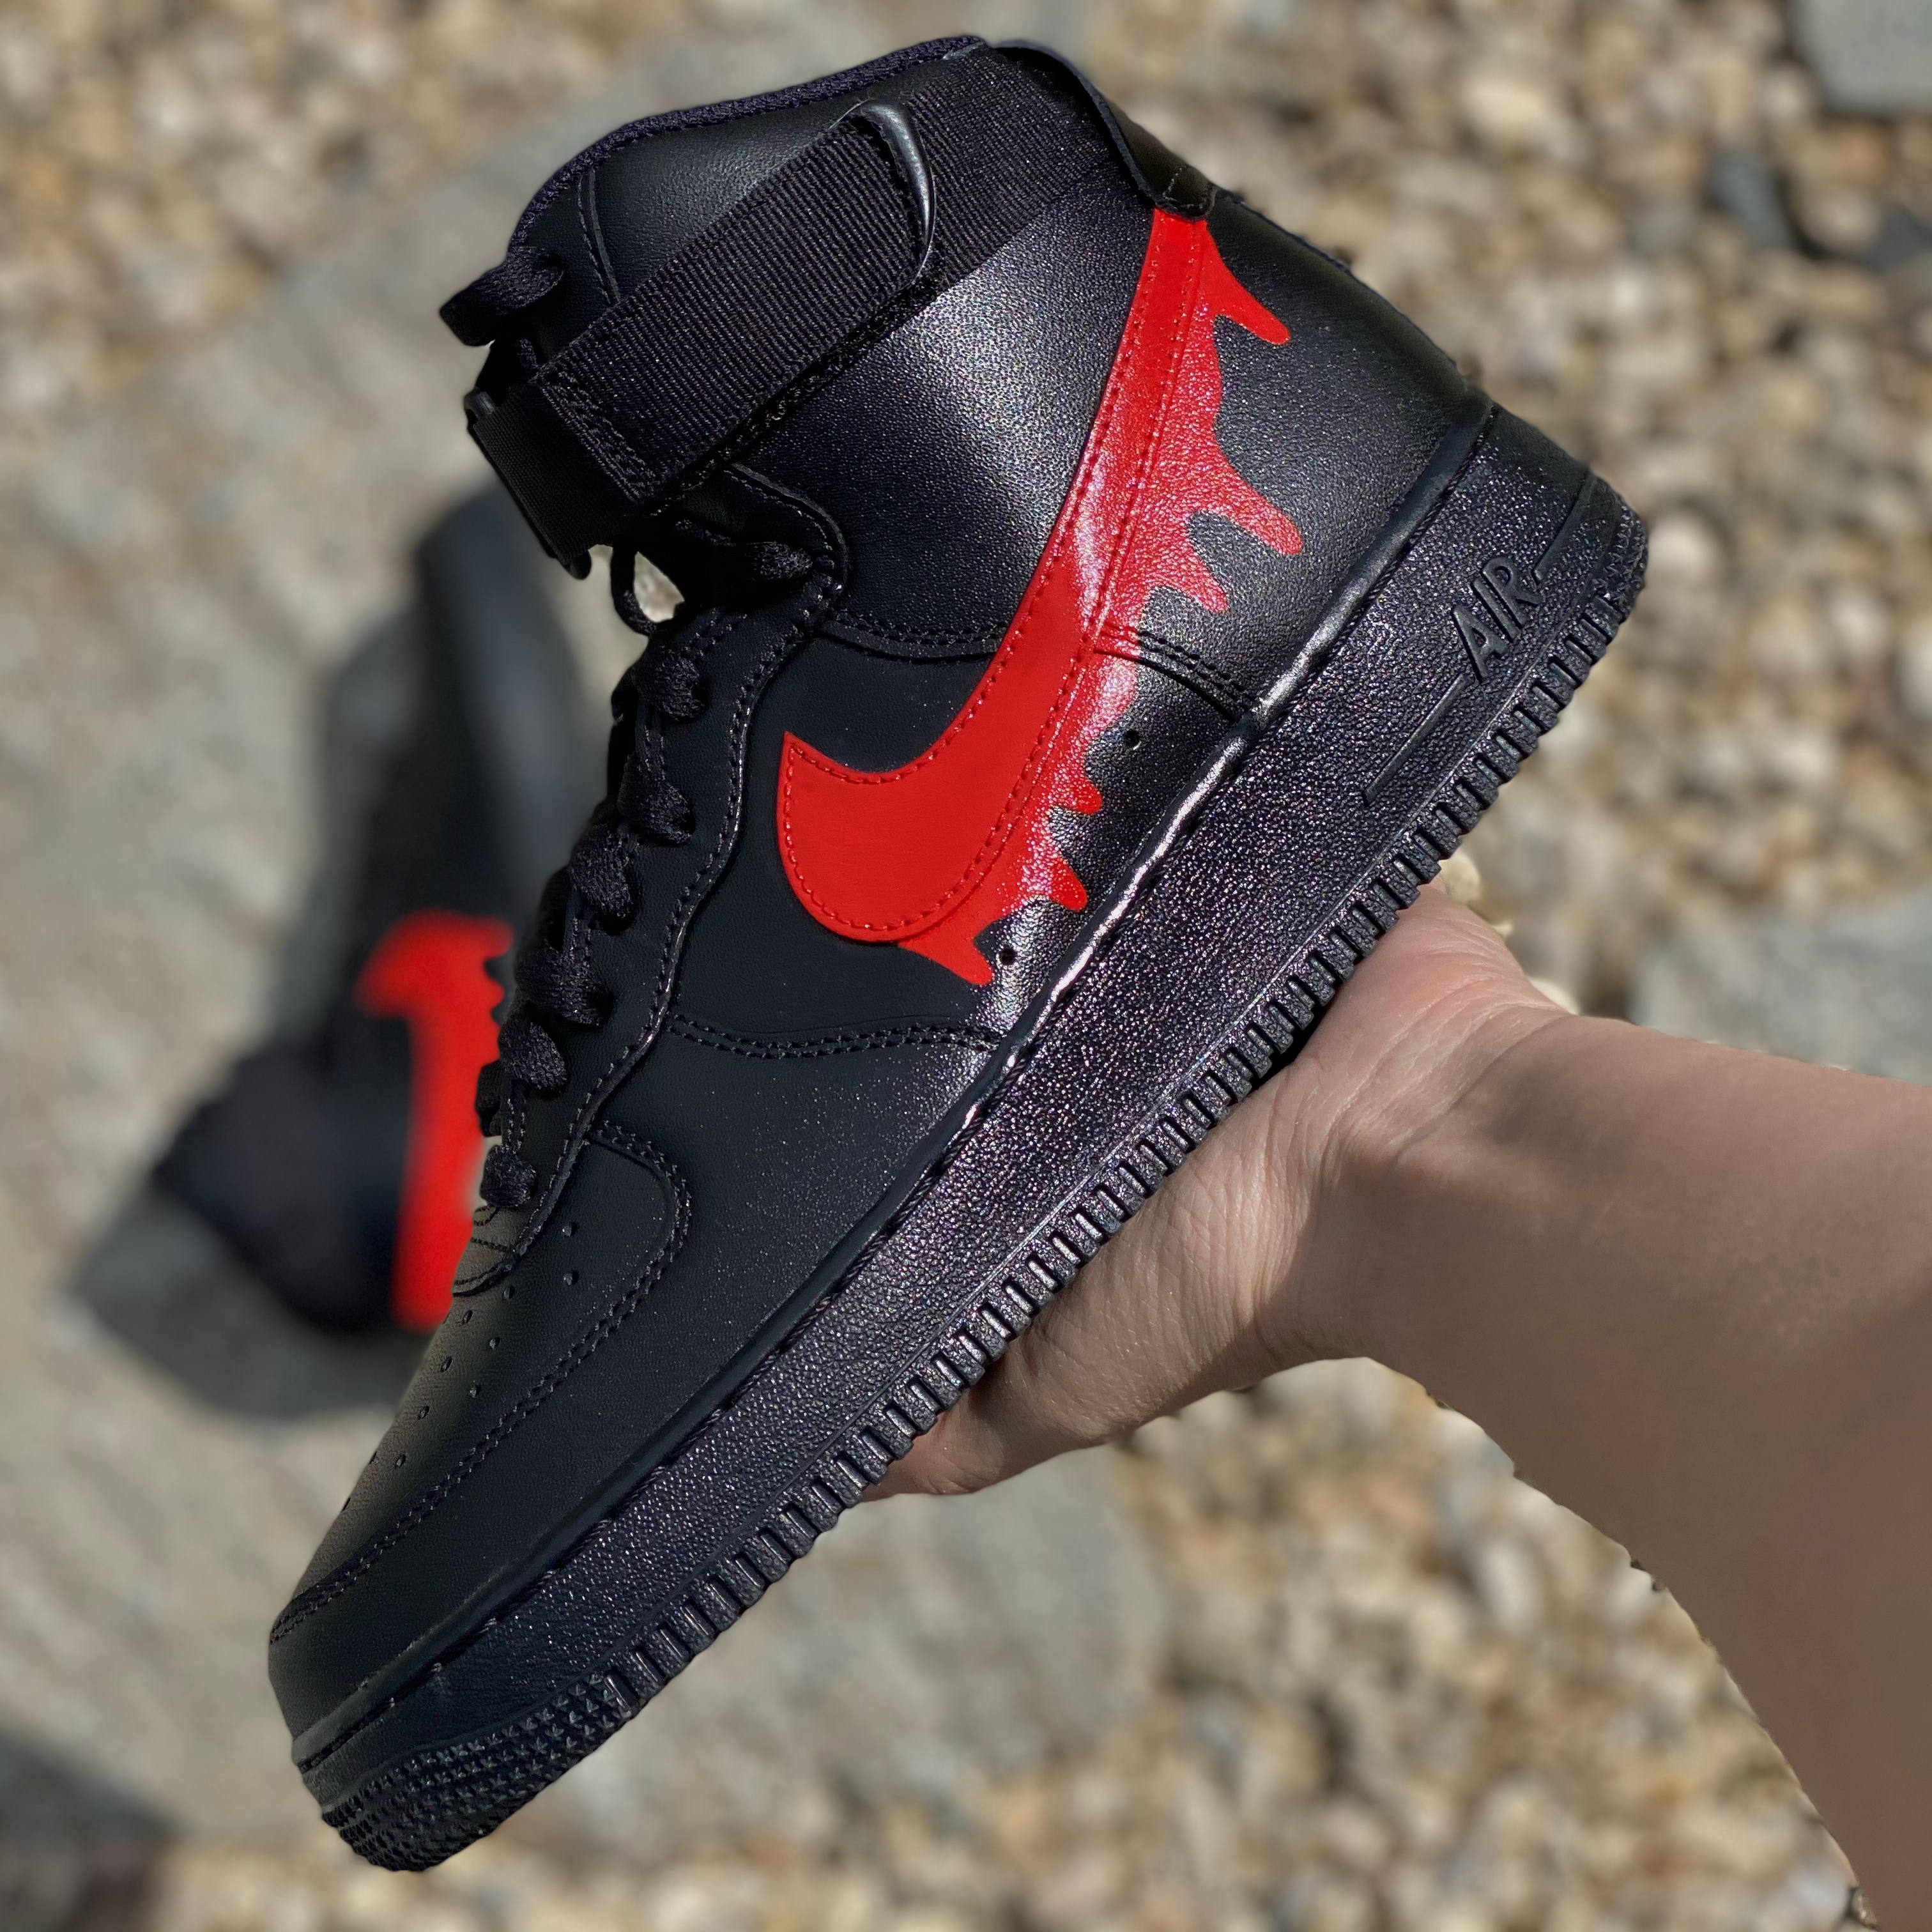 Nike Air Force 1 High By You Men's Custom Shoes.